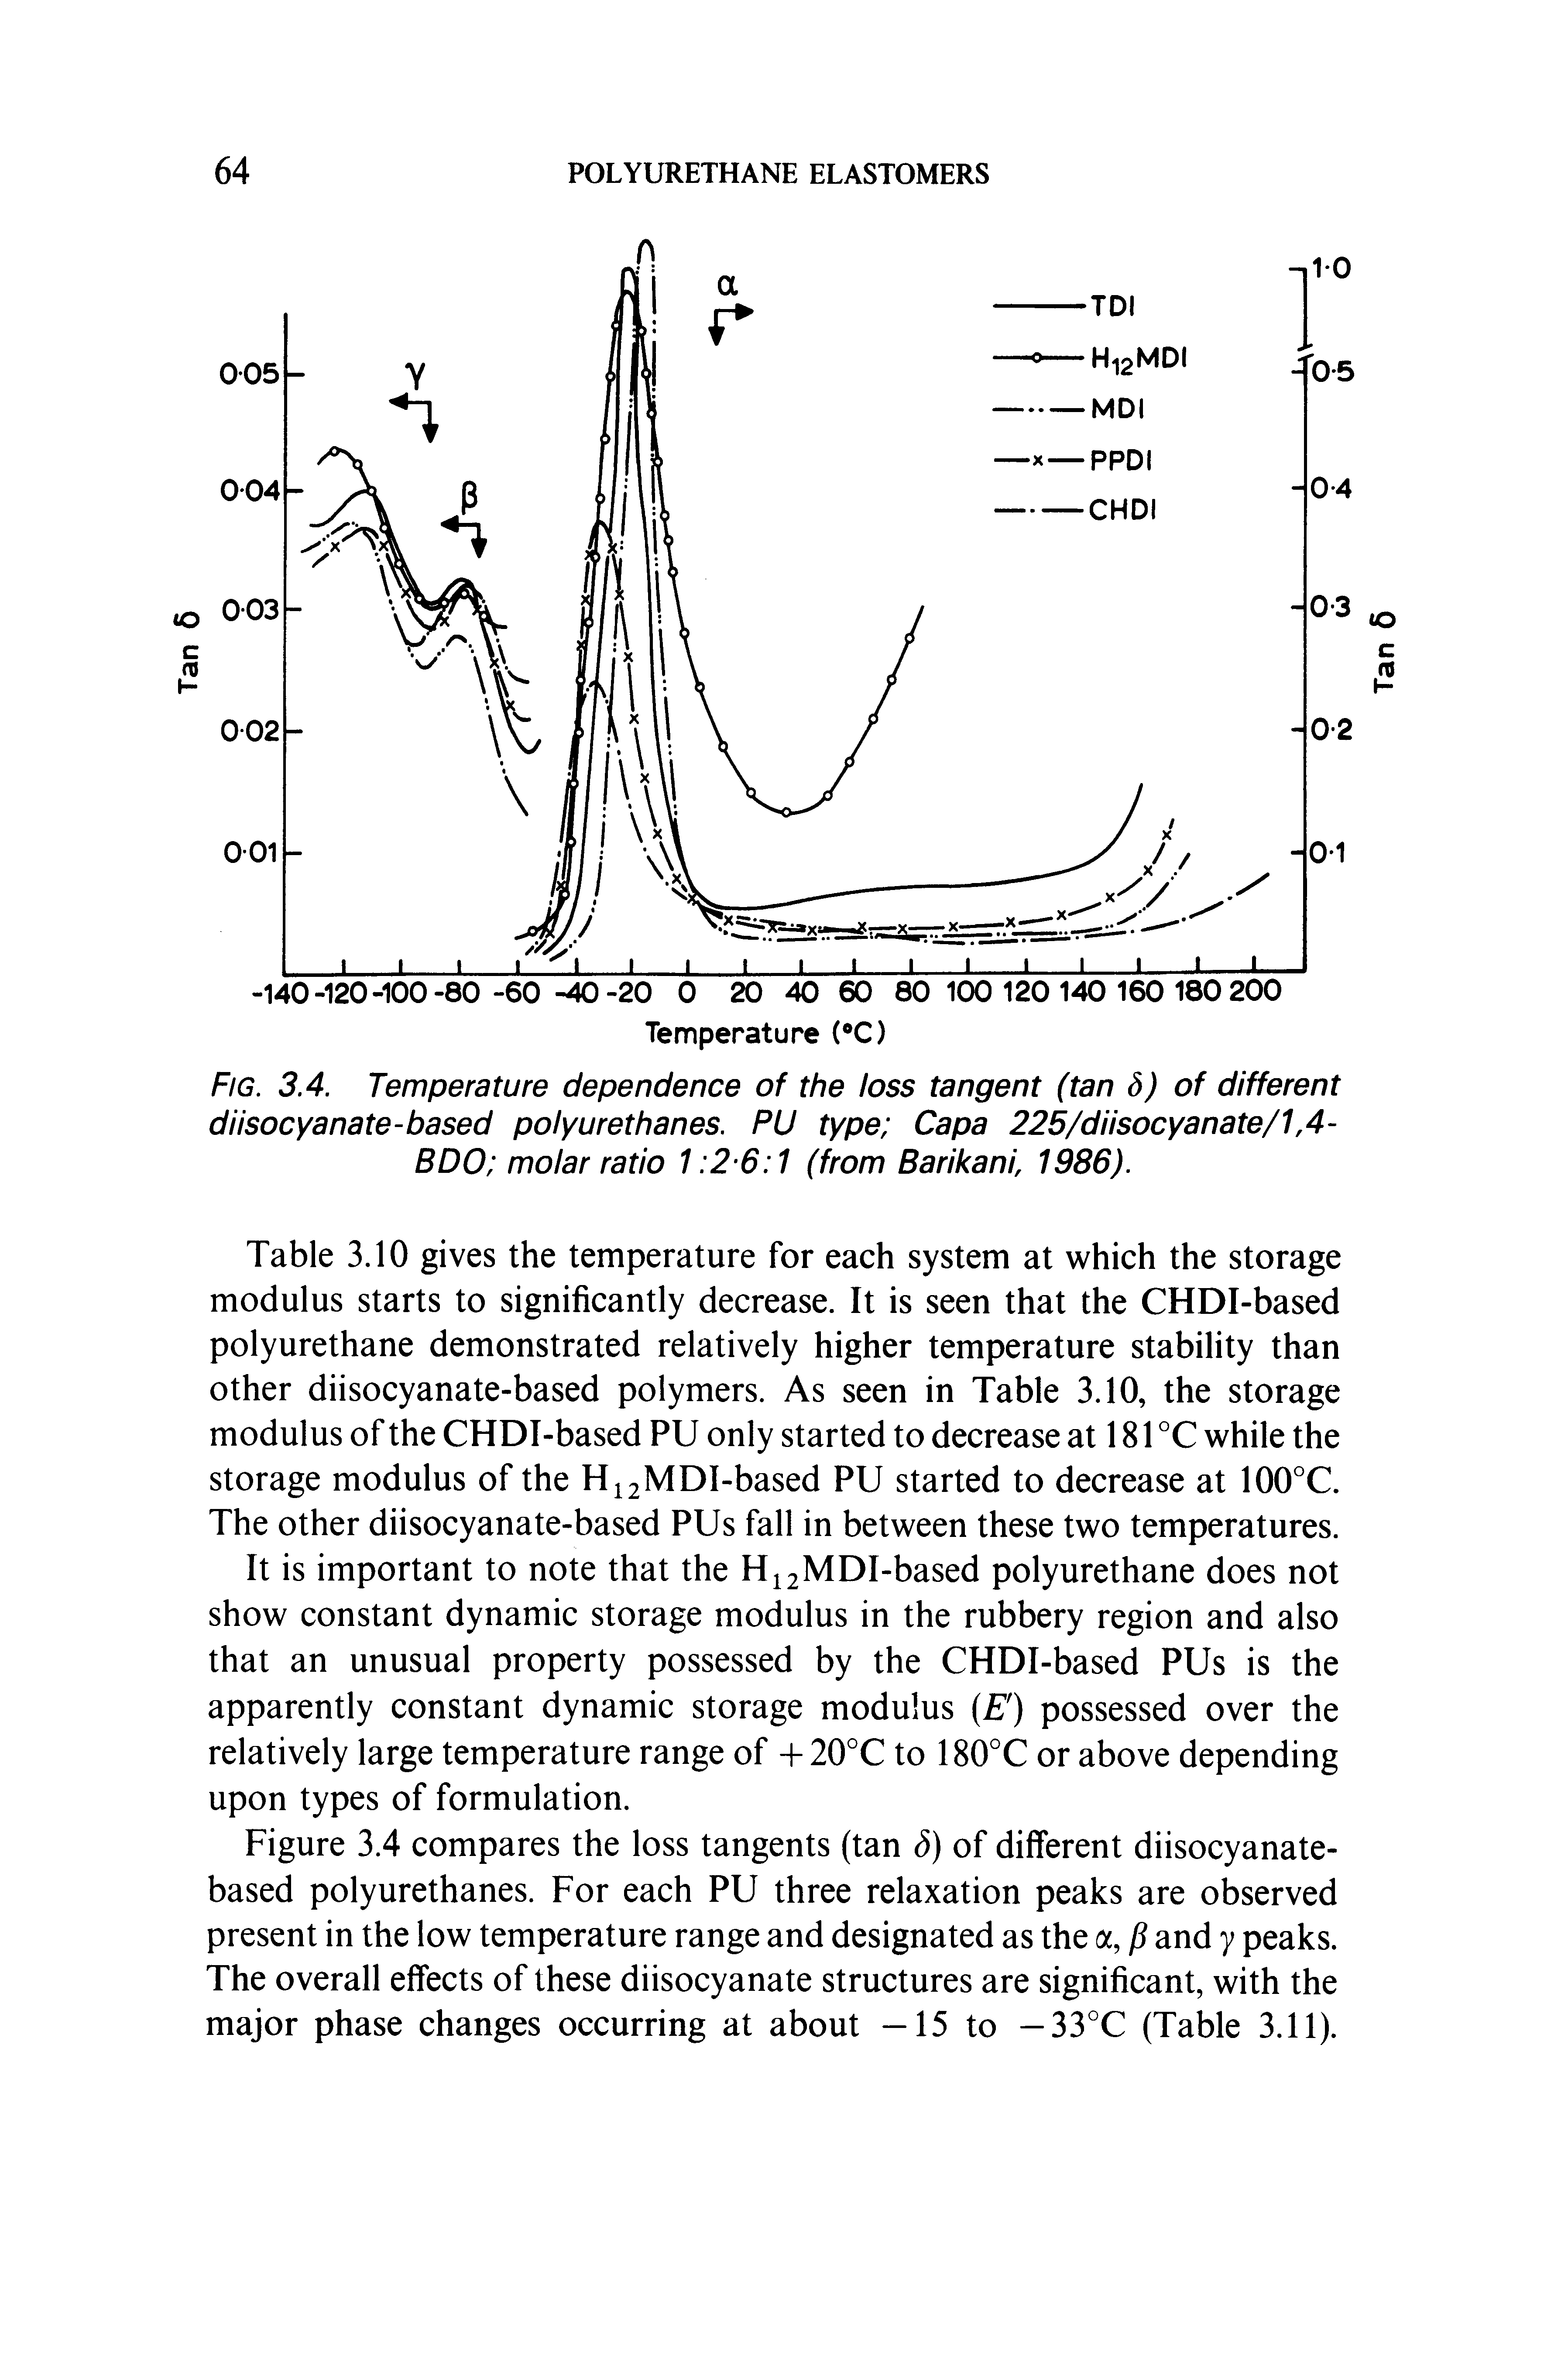 Fig. 3.4. Temperature dependence of the loss tangent (tan S) of different diisocyanate-based polyurethanes. PU type Capa 225/diisocyanate/1A BDO molar ratio 1 2 6 1 (from Barikanf 1986).